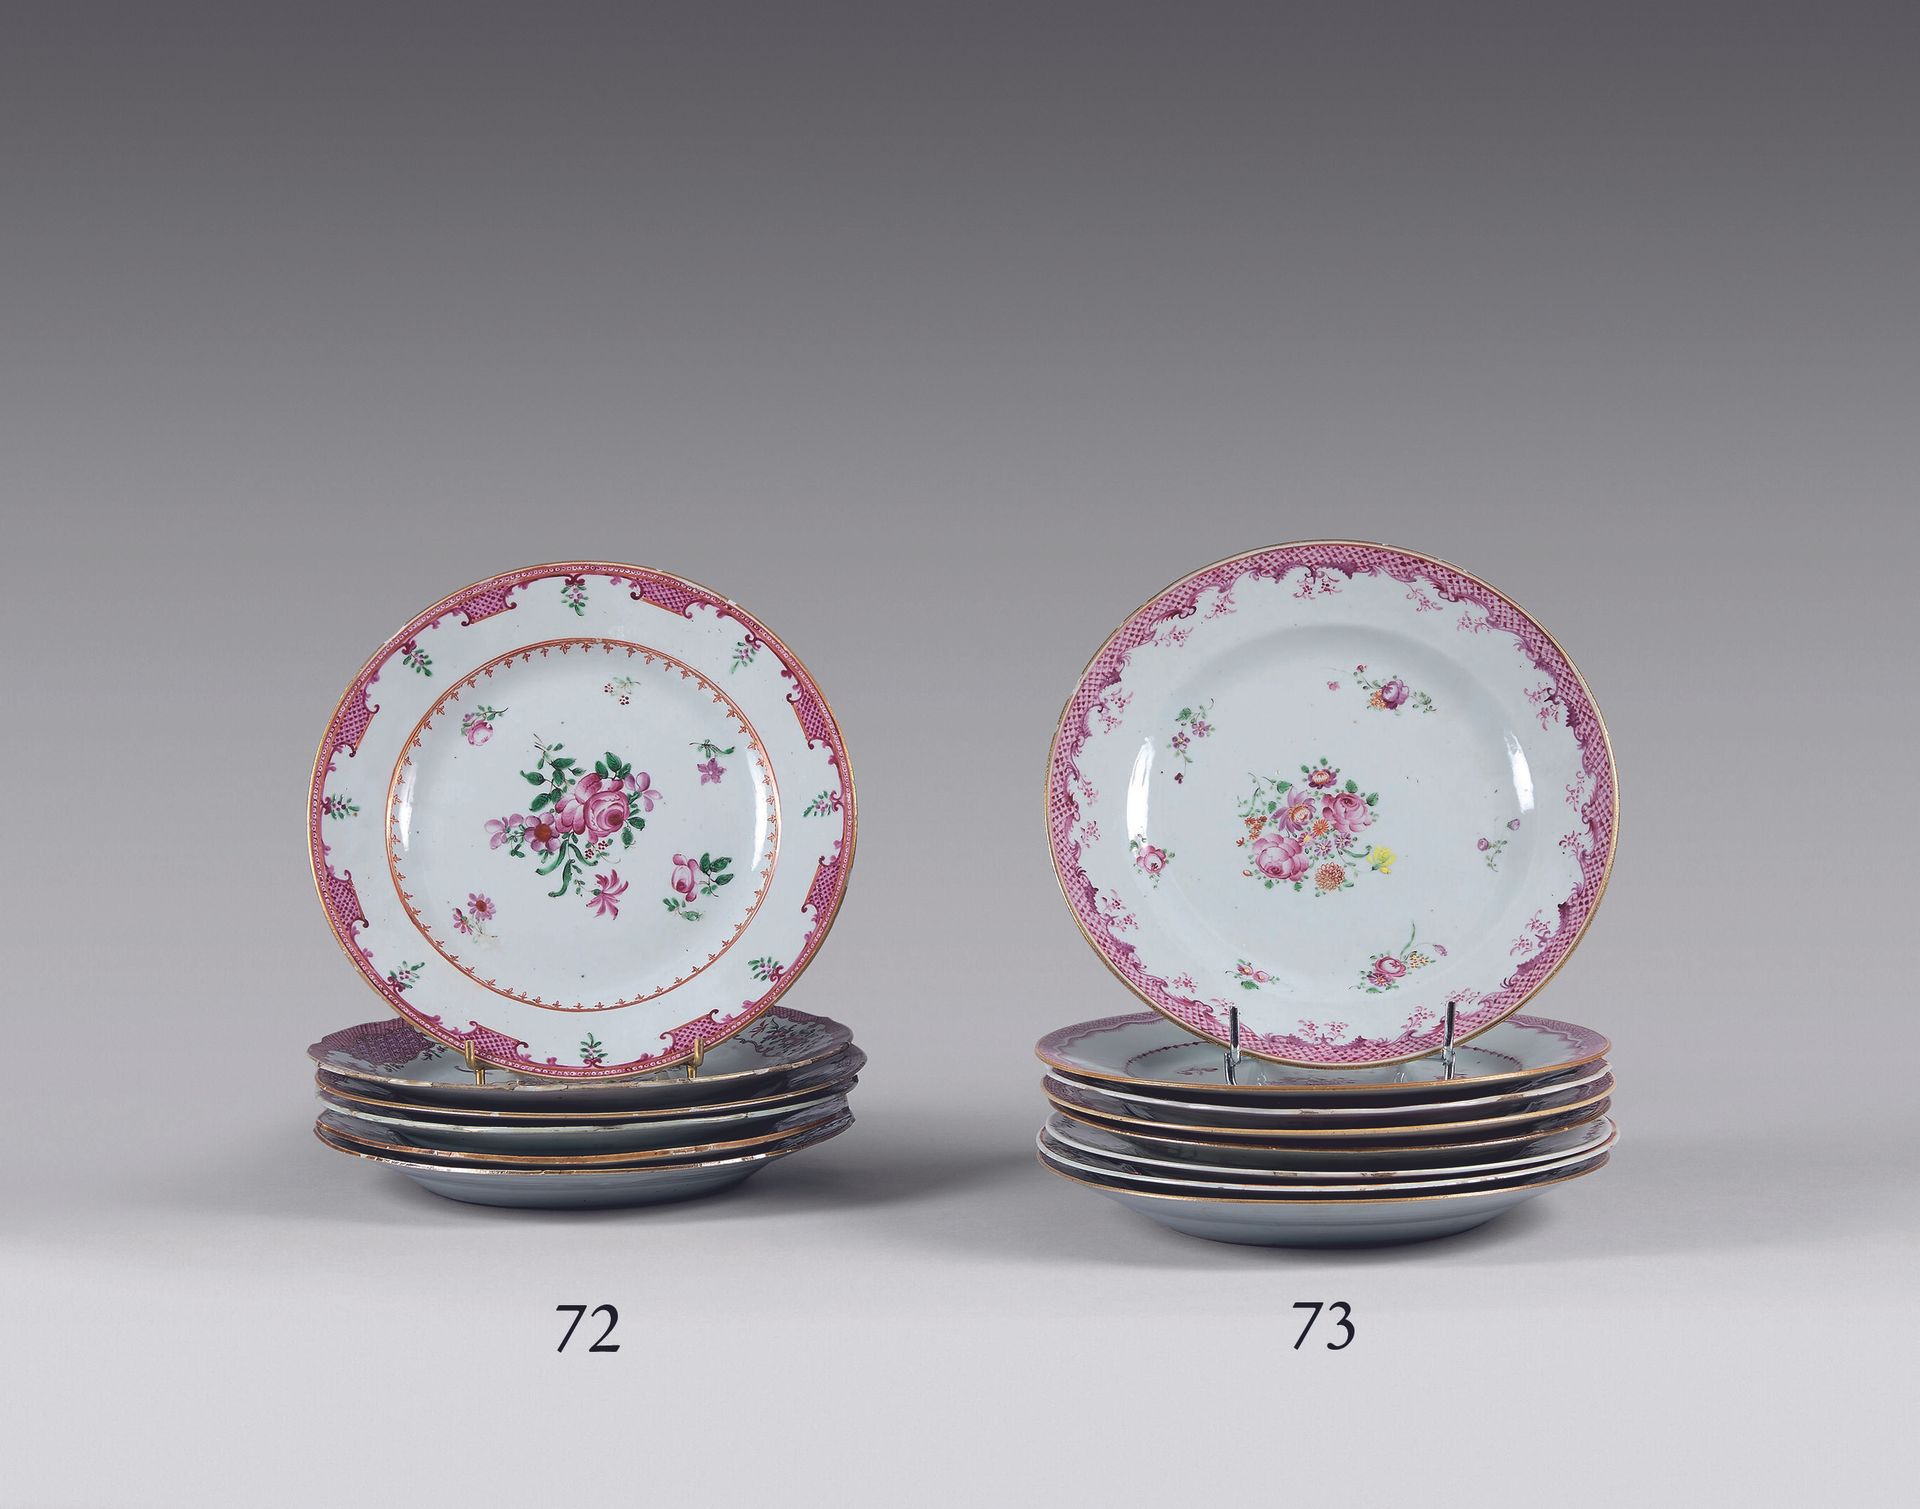 Null CHINA, Compagnie des Indes
Set of eight plates in polychrome porcelain of t&hellip;